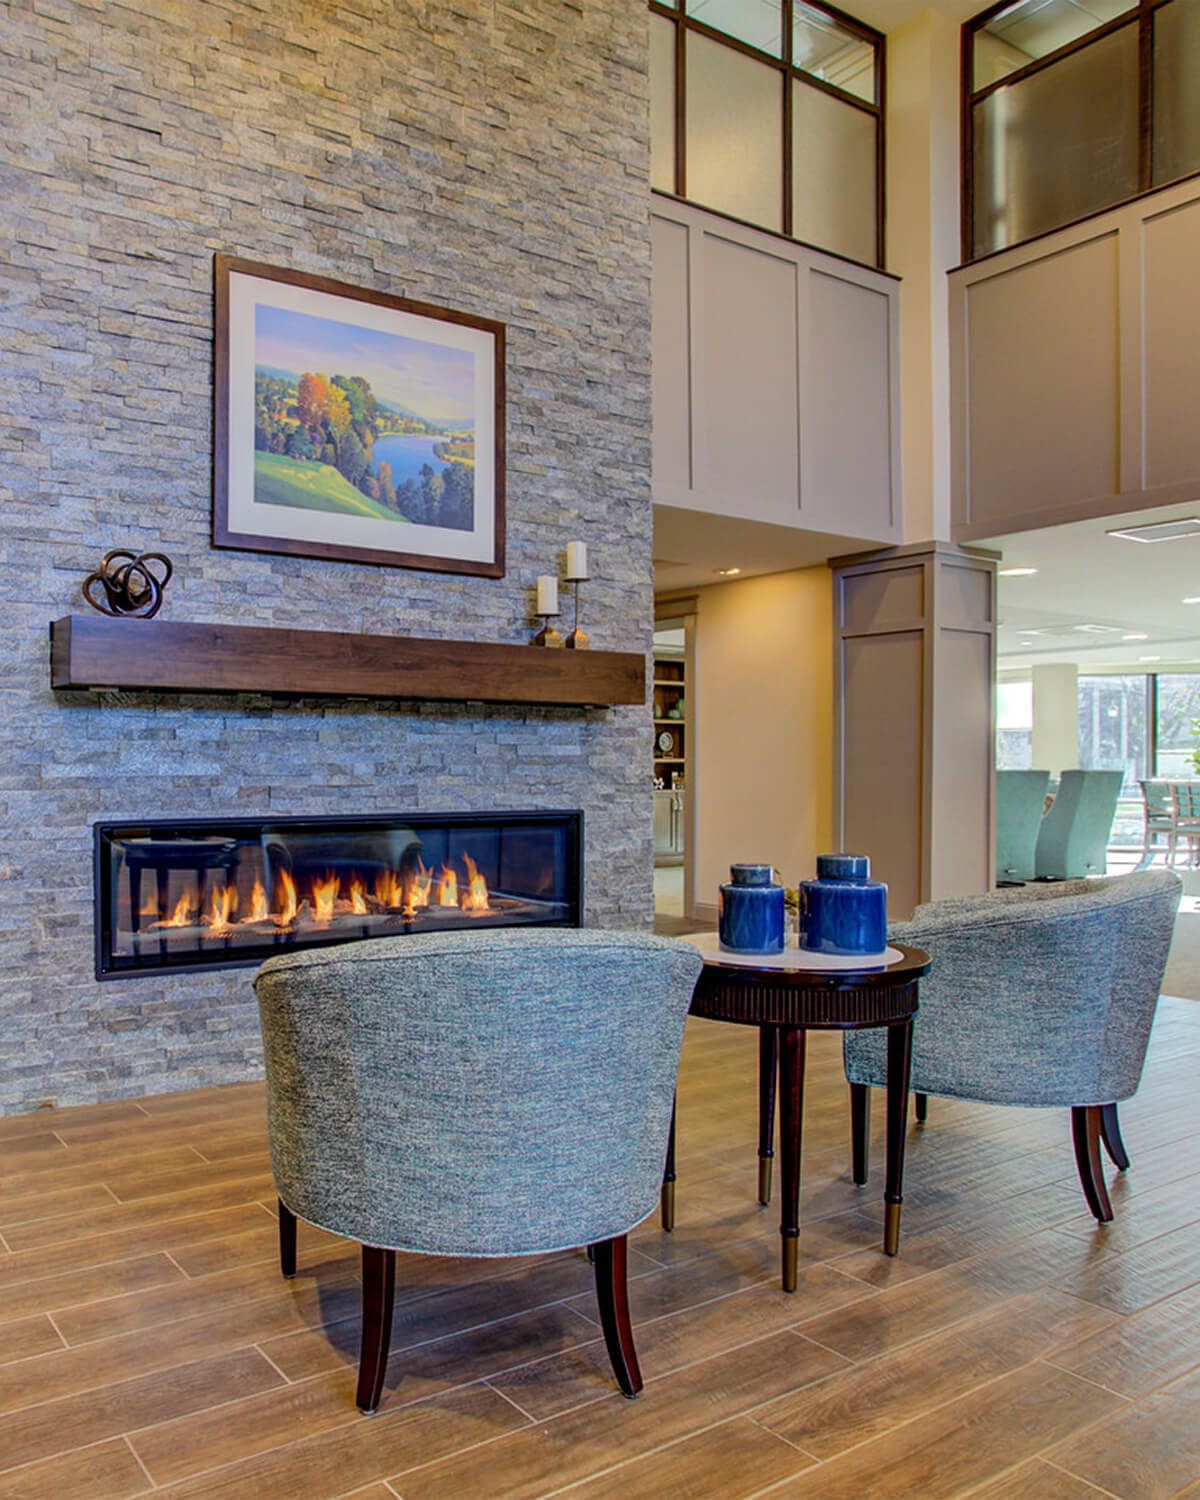 Interior view of the lobby of a senior living facility. A large stone fireplace column is seen with artwork, a minimalistic shelf, and modern horizontal fireplace is seen, along with two upholstered chairs and a small coffee table.